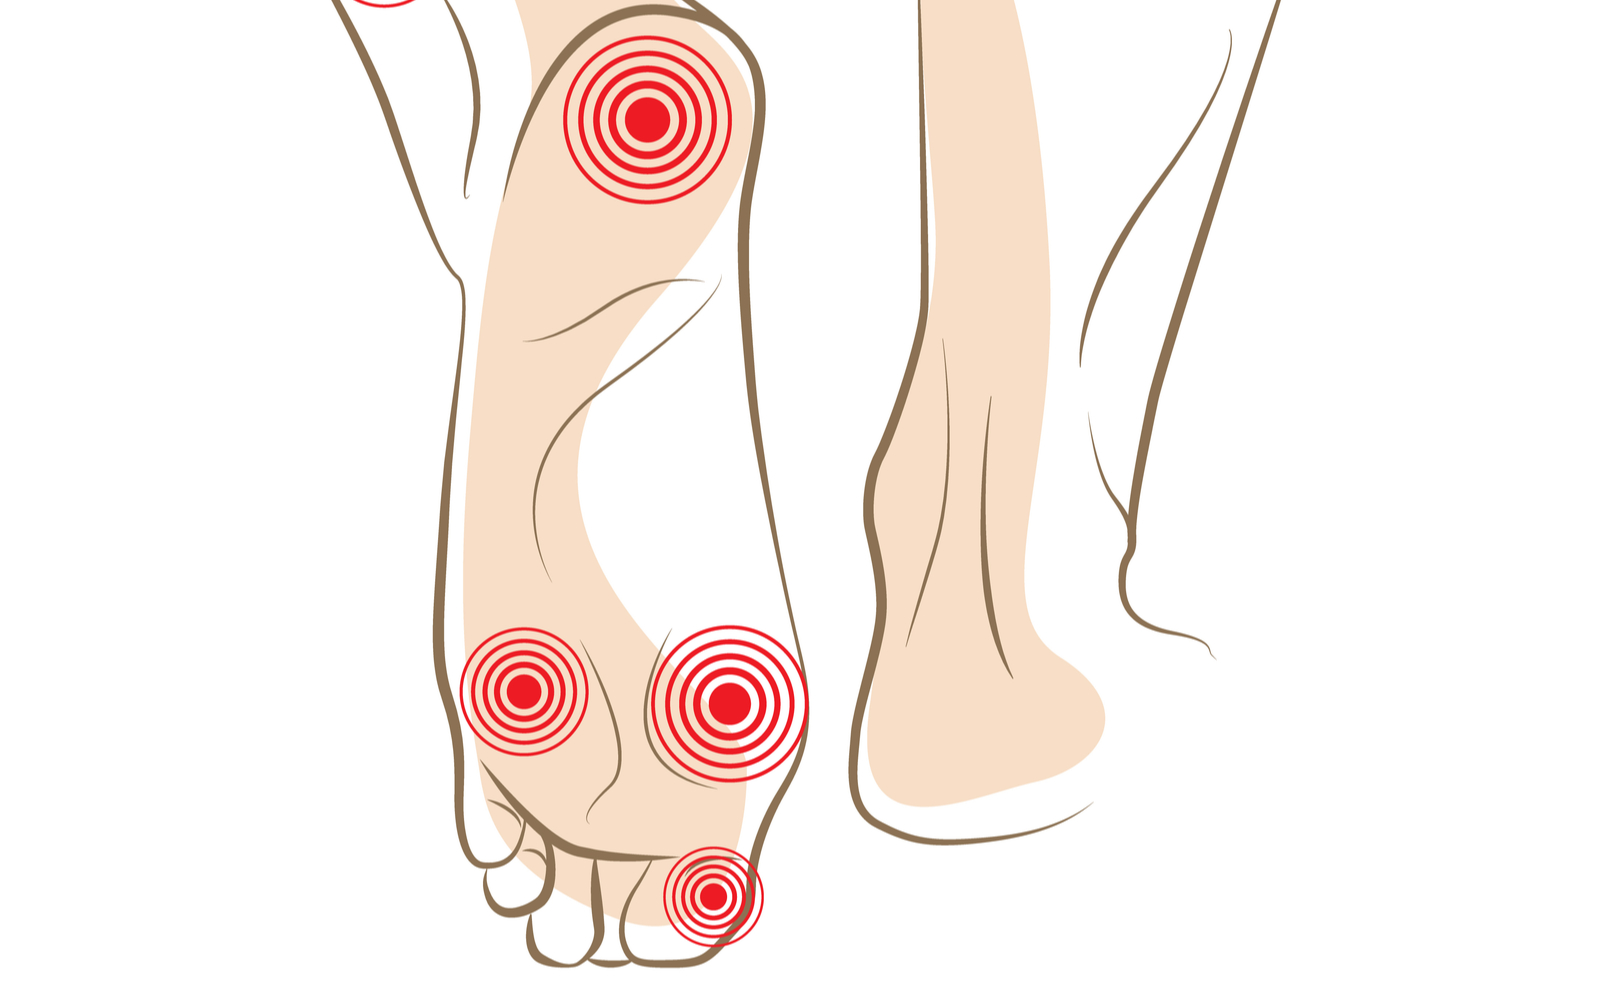 Illustration of foot with pain points